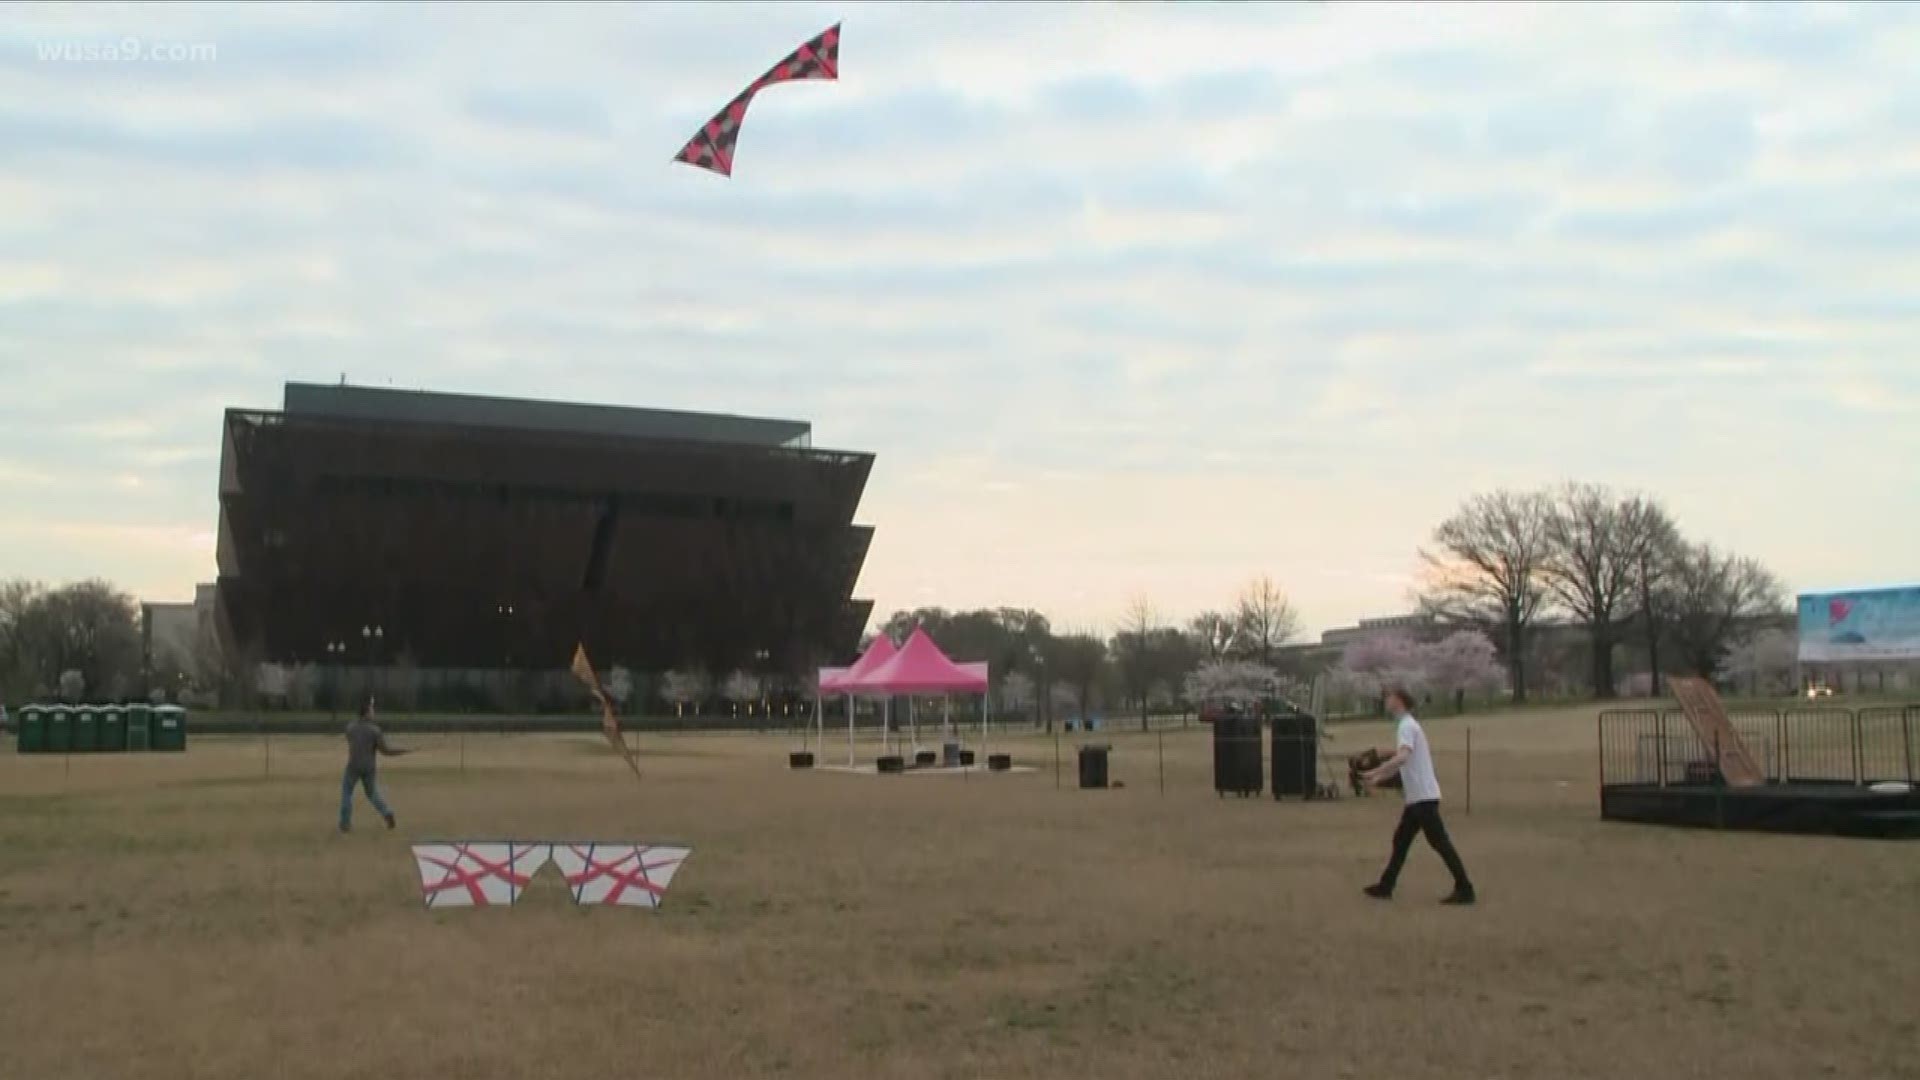 Thousands of people took advantage of today's nice weather at the annual Cherry Blossom Kite Festival on the National Mall.